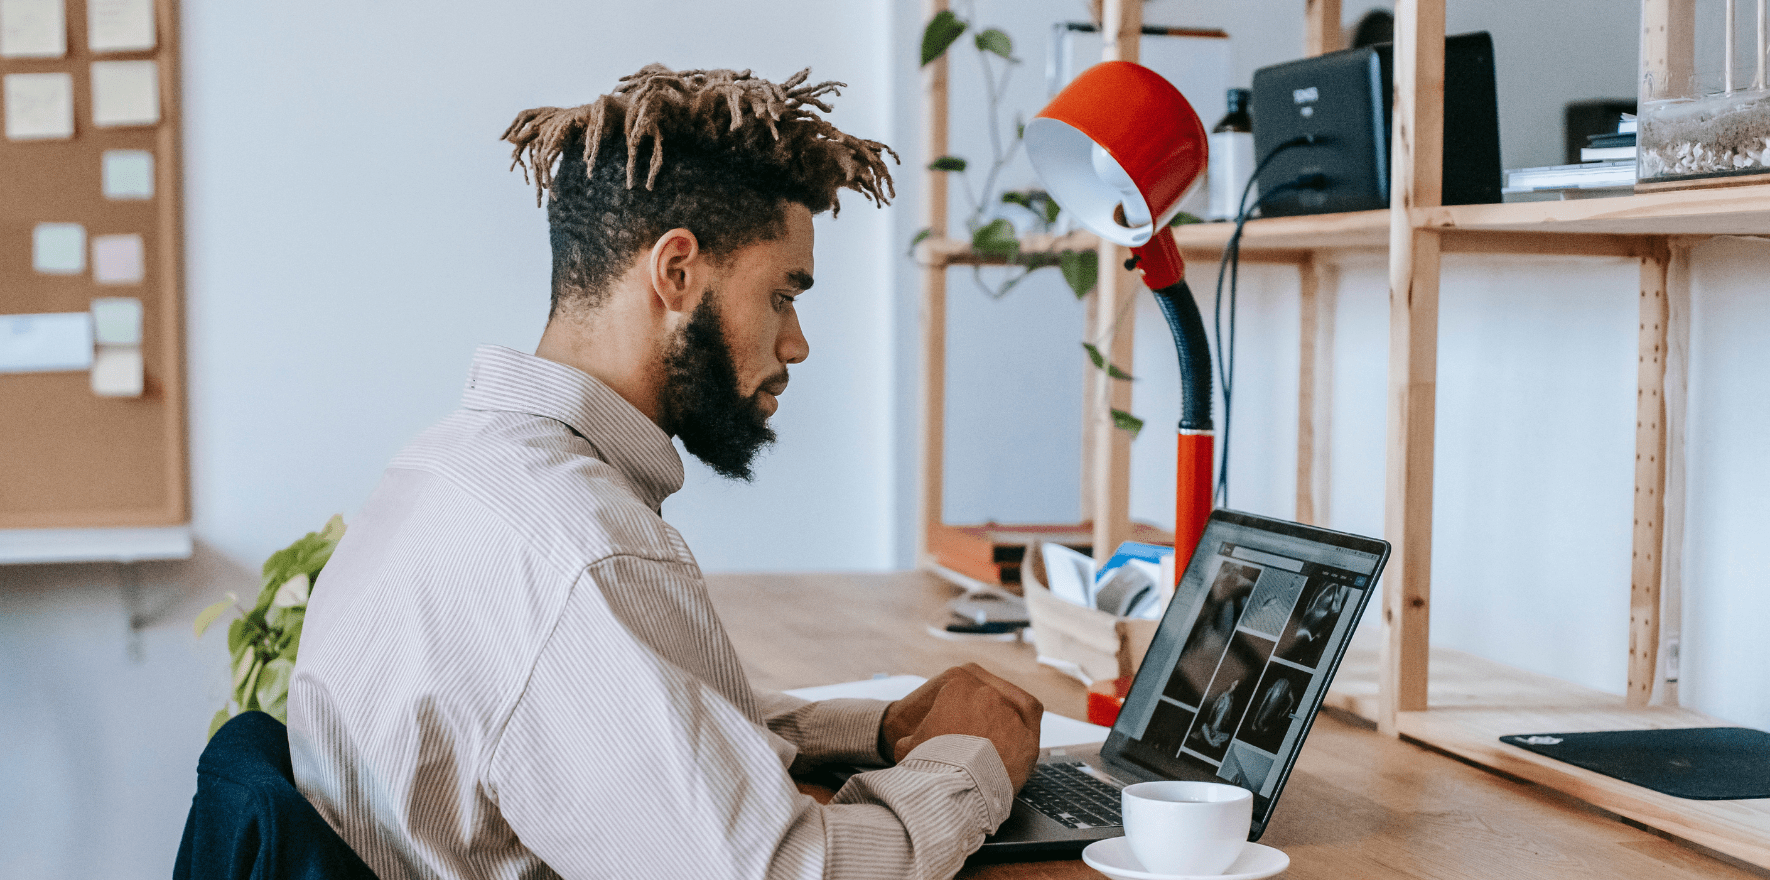 working from home can make remote employees feel disconnected